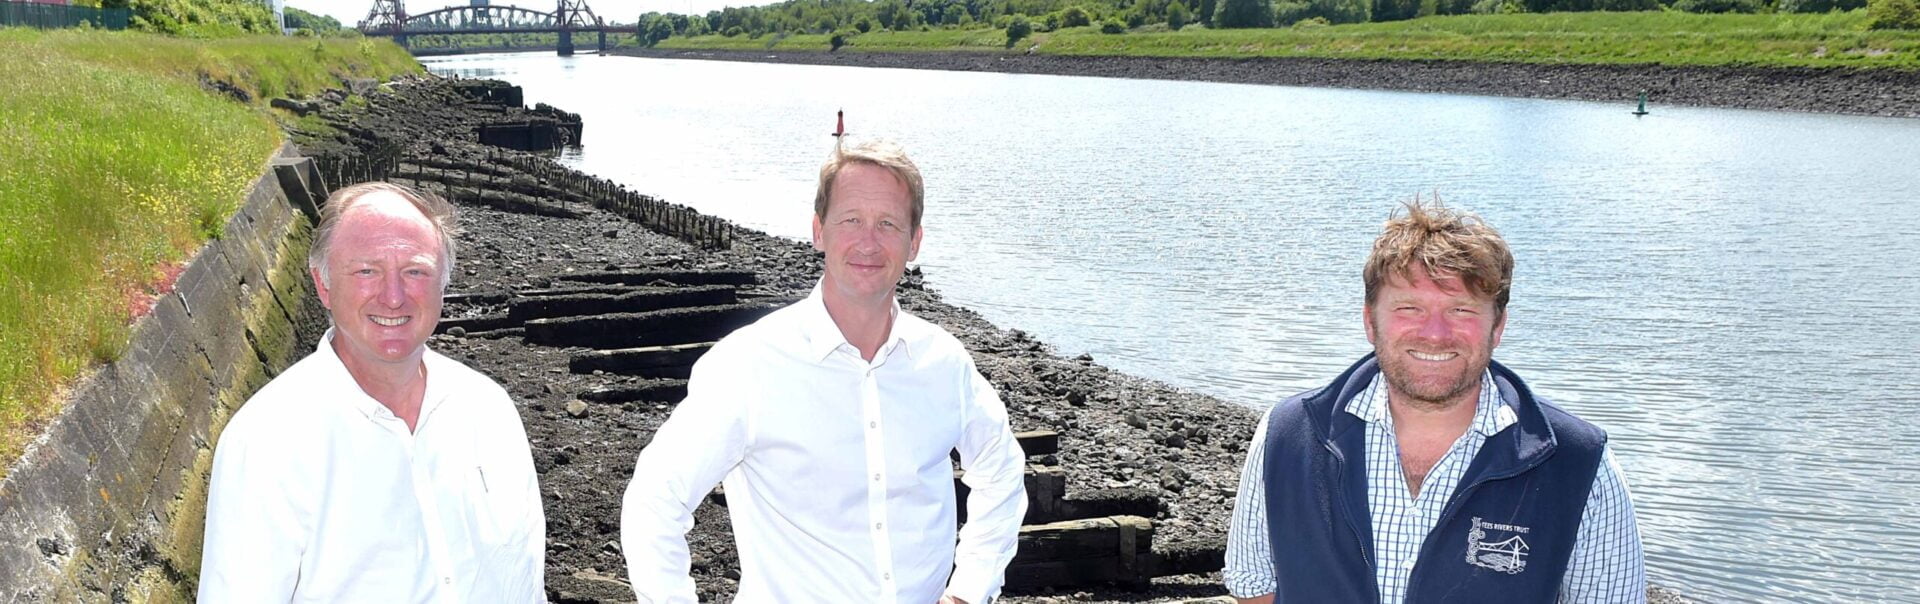 PD Ports announces charity partnership with Tees Rivers Trust